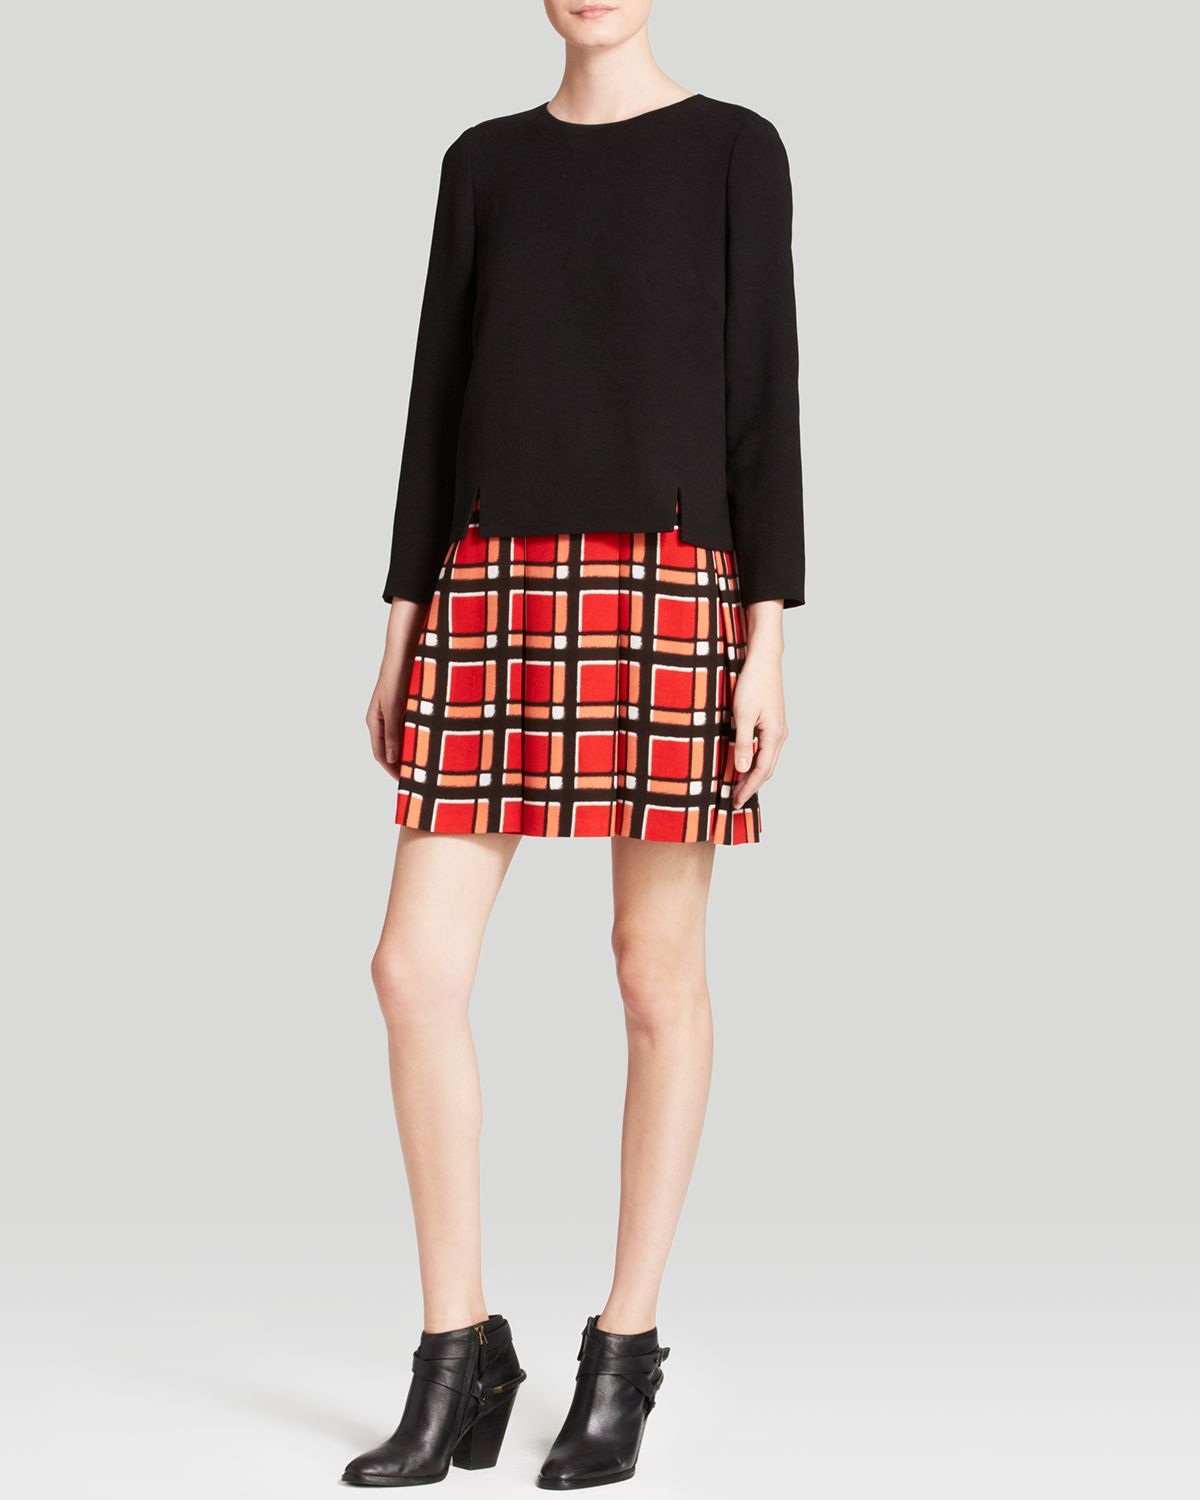 Marc by marc jacobs Dress - Toto Plaid Crepe in Red (Cambridge Red ...